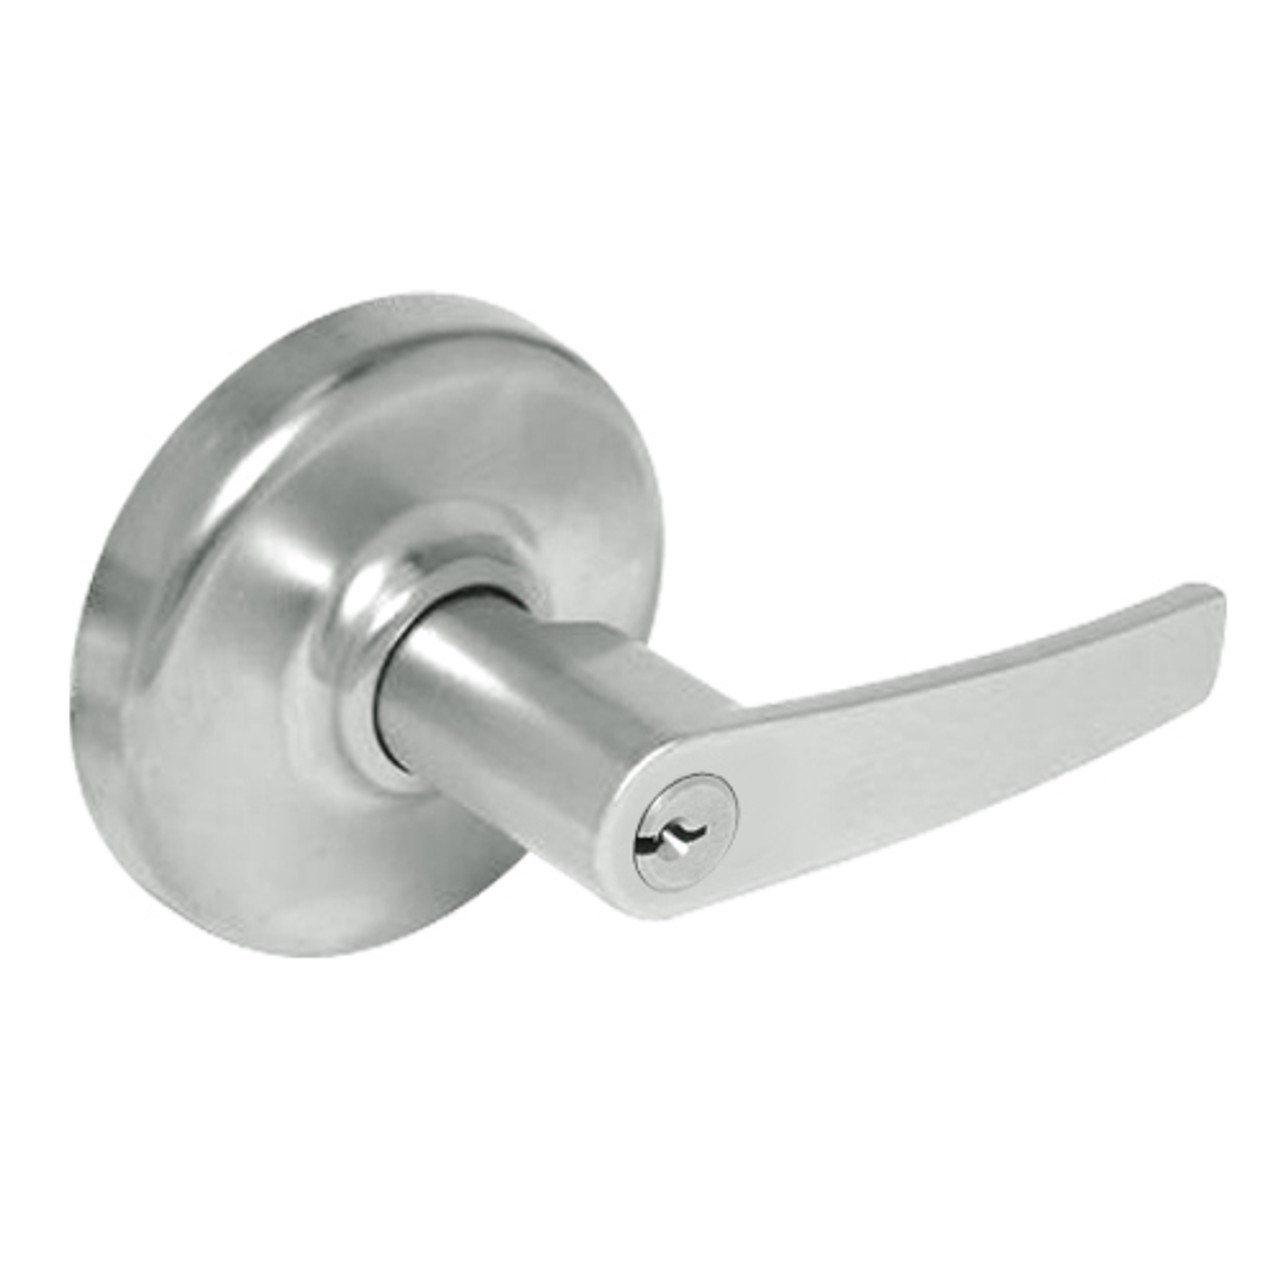 CL3375-AZD-618 Corbin CL3300 Series Extra Heavy Duty Corridor/Dormitory Cylindrical Locksets with Armstrong Lever in Bright Nickel Plated Finish